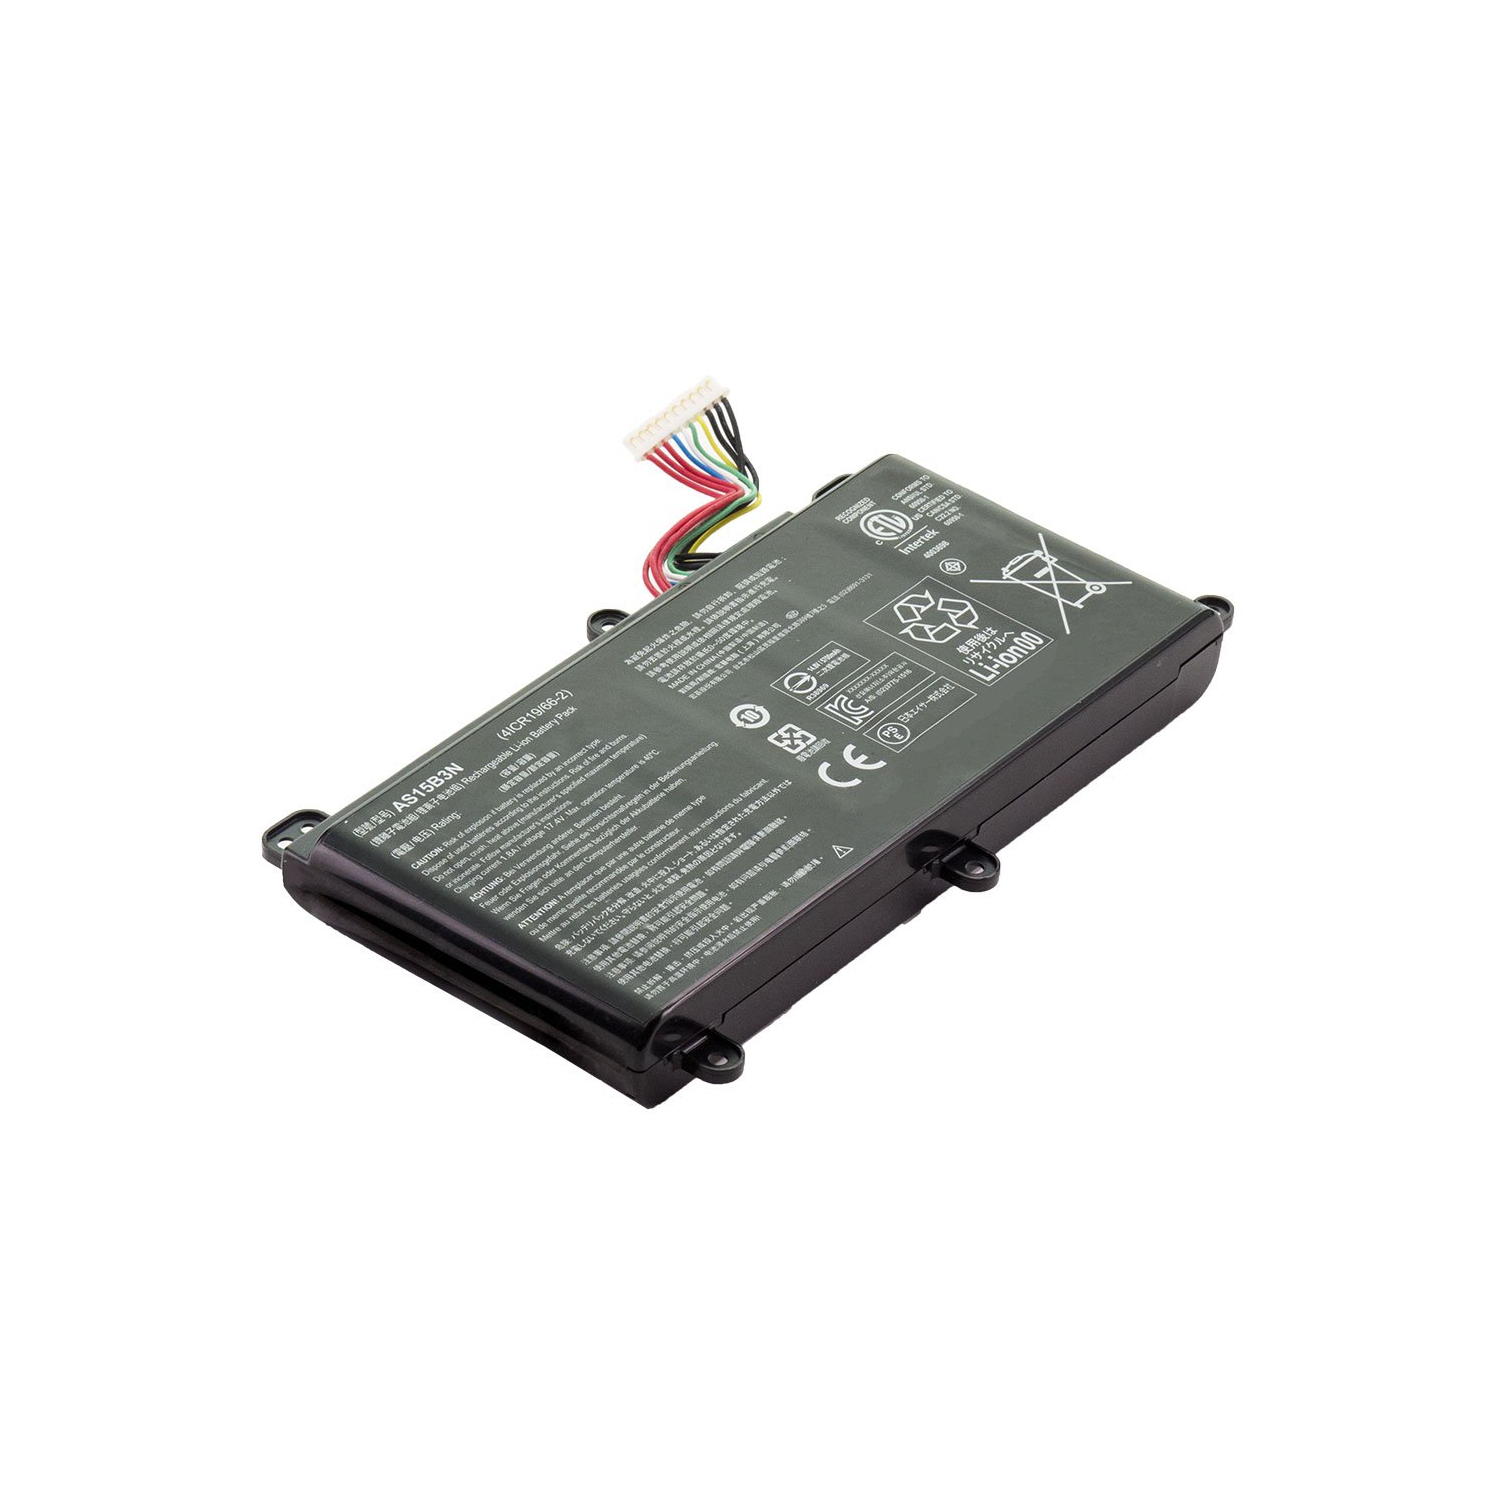 Laptop Battery Replacement for Acer Predator 15 G9-592-7253, AS15B3N, KT.00803.004, KT.00803.005